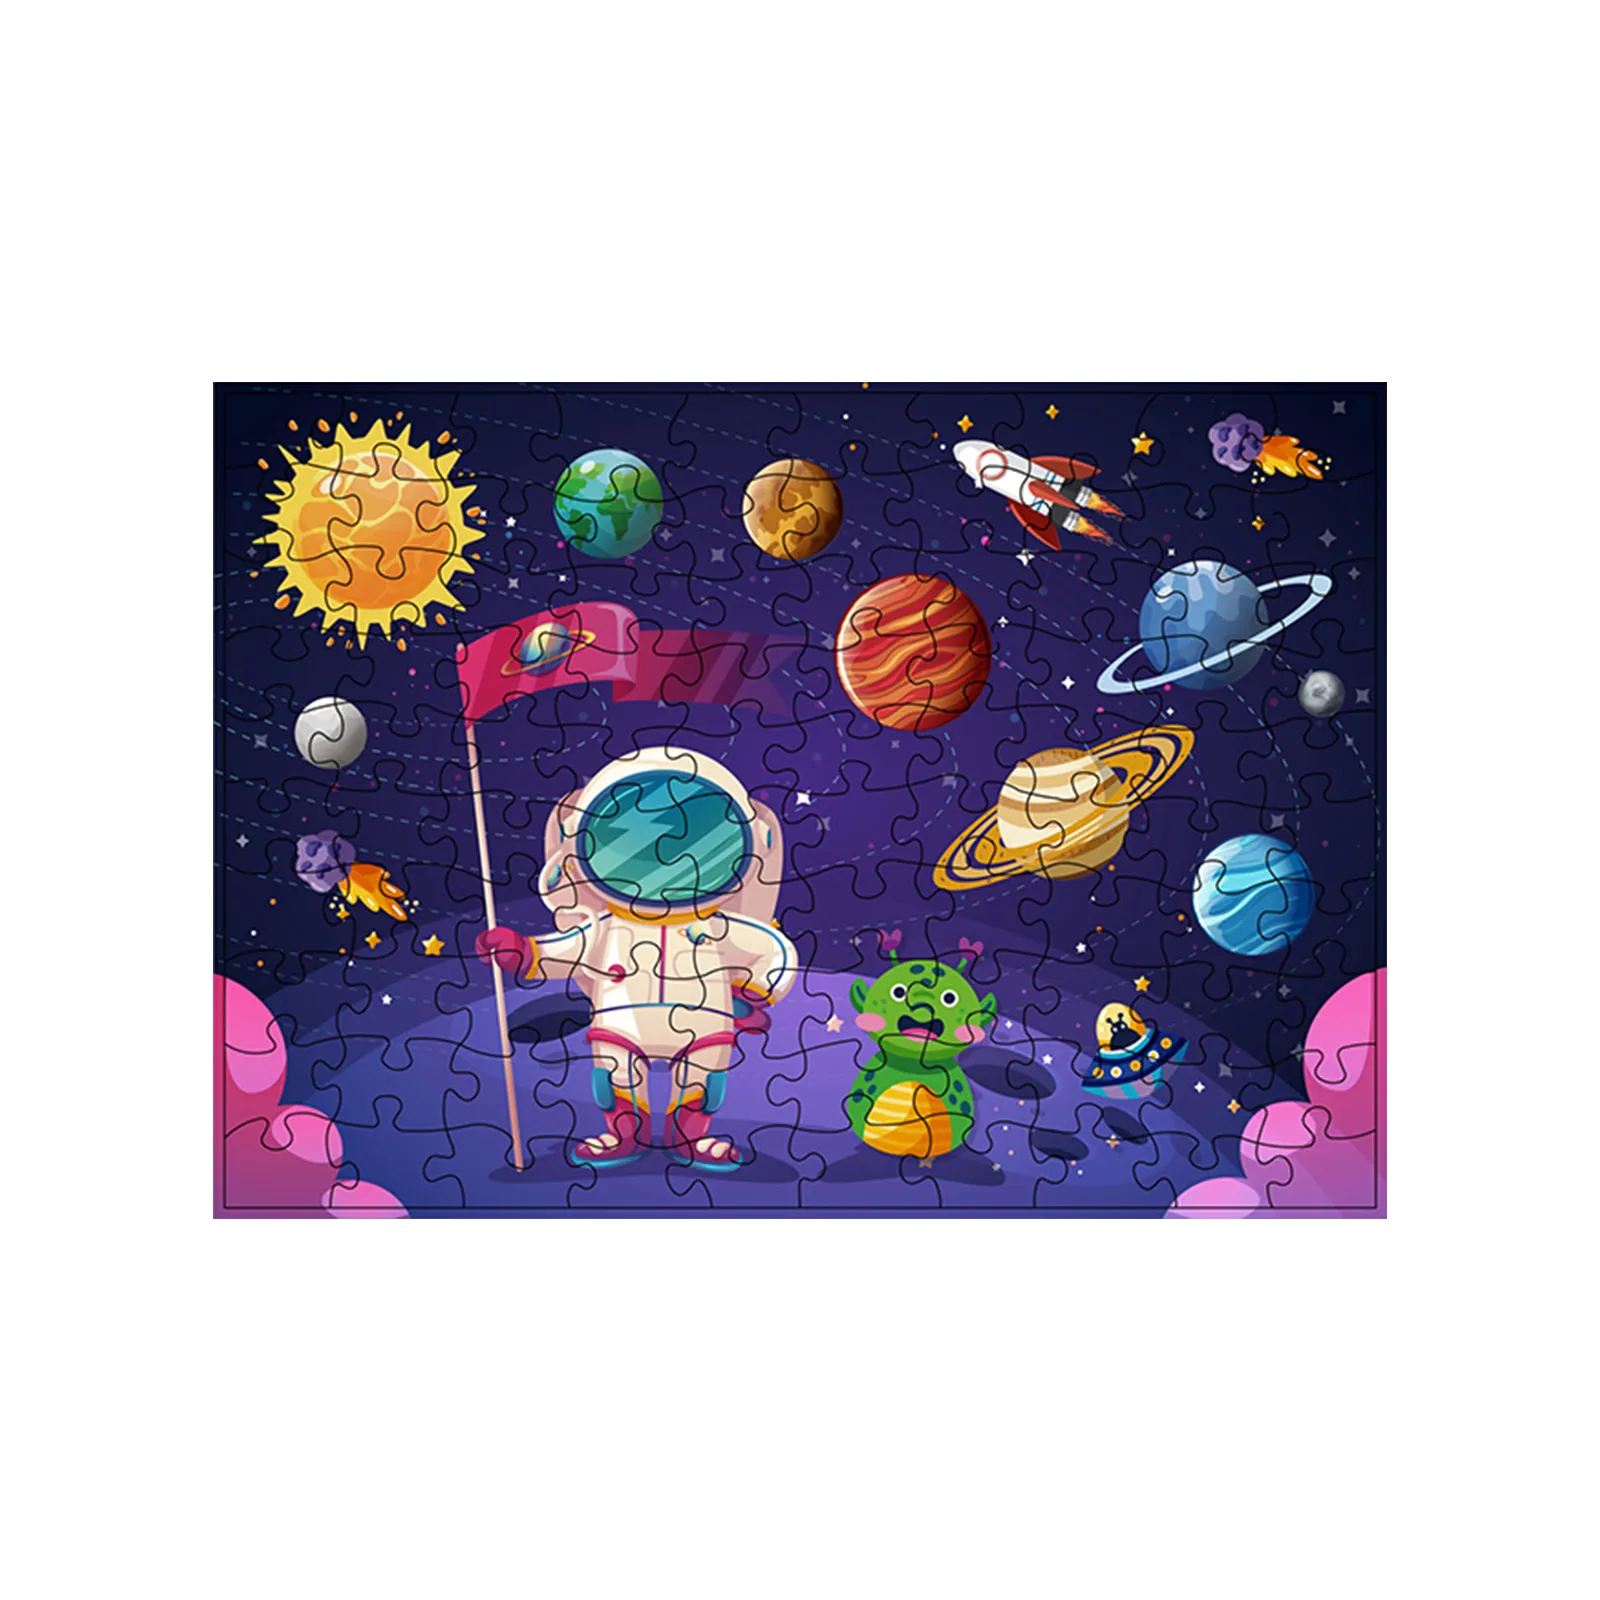 100-Piece Children's Space-themed Jigsaw Puzzle - Large Pieces for Easy Assembly